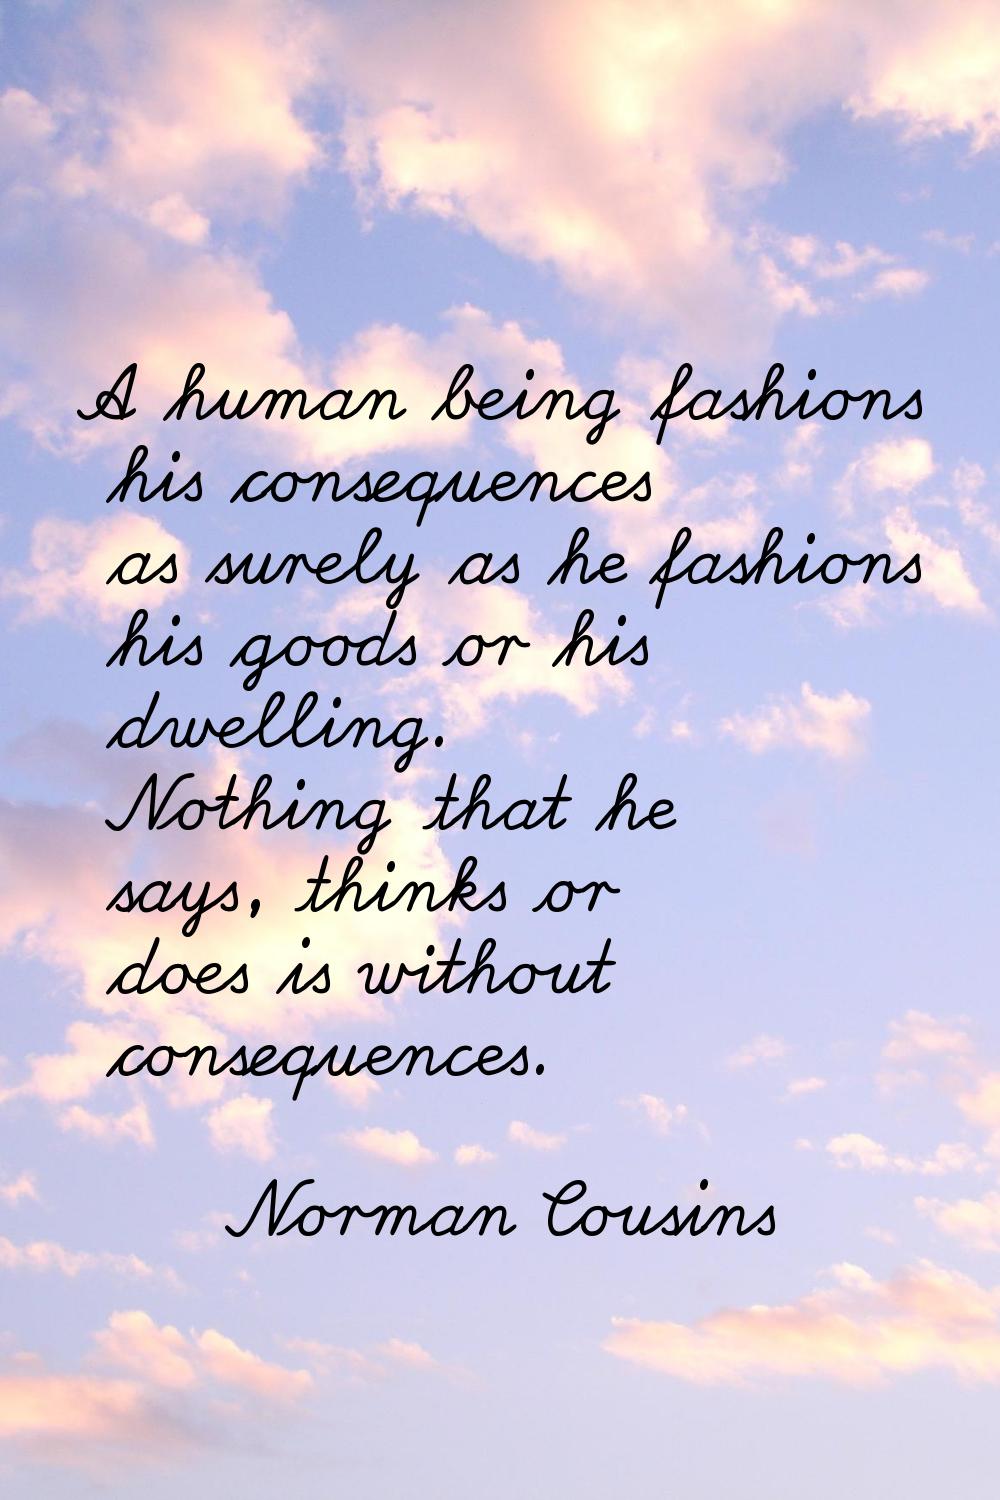 A human being fashions his consequences as surely as he fashions his goods or his dwelling. Nothing